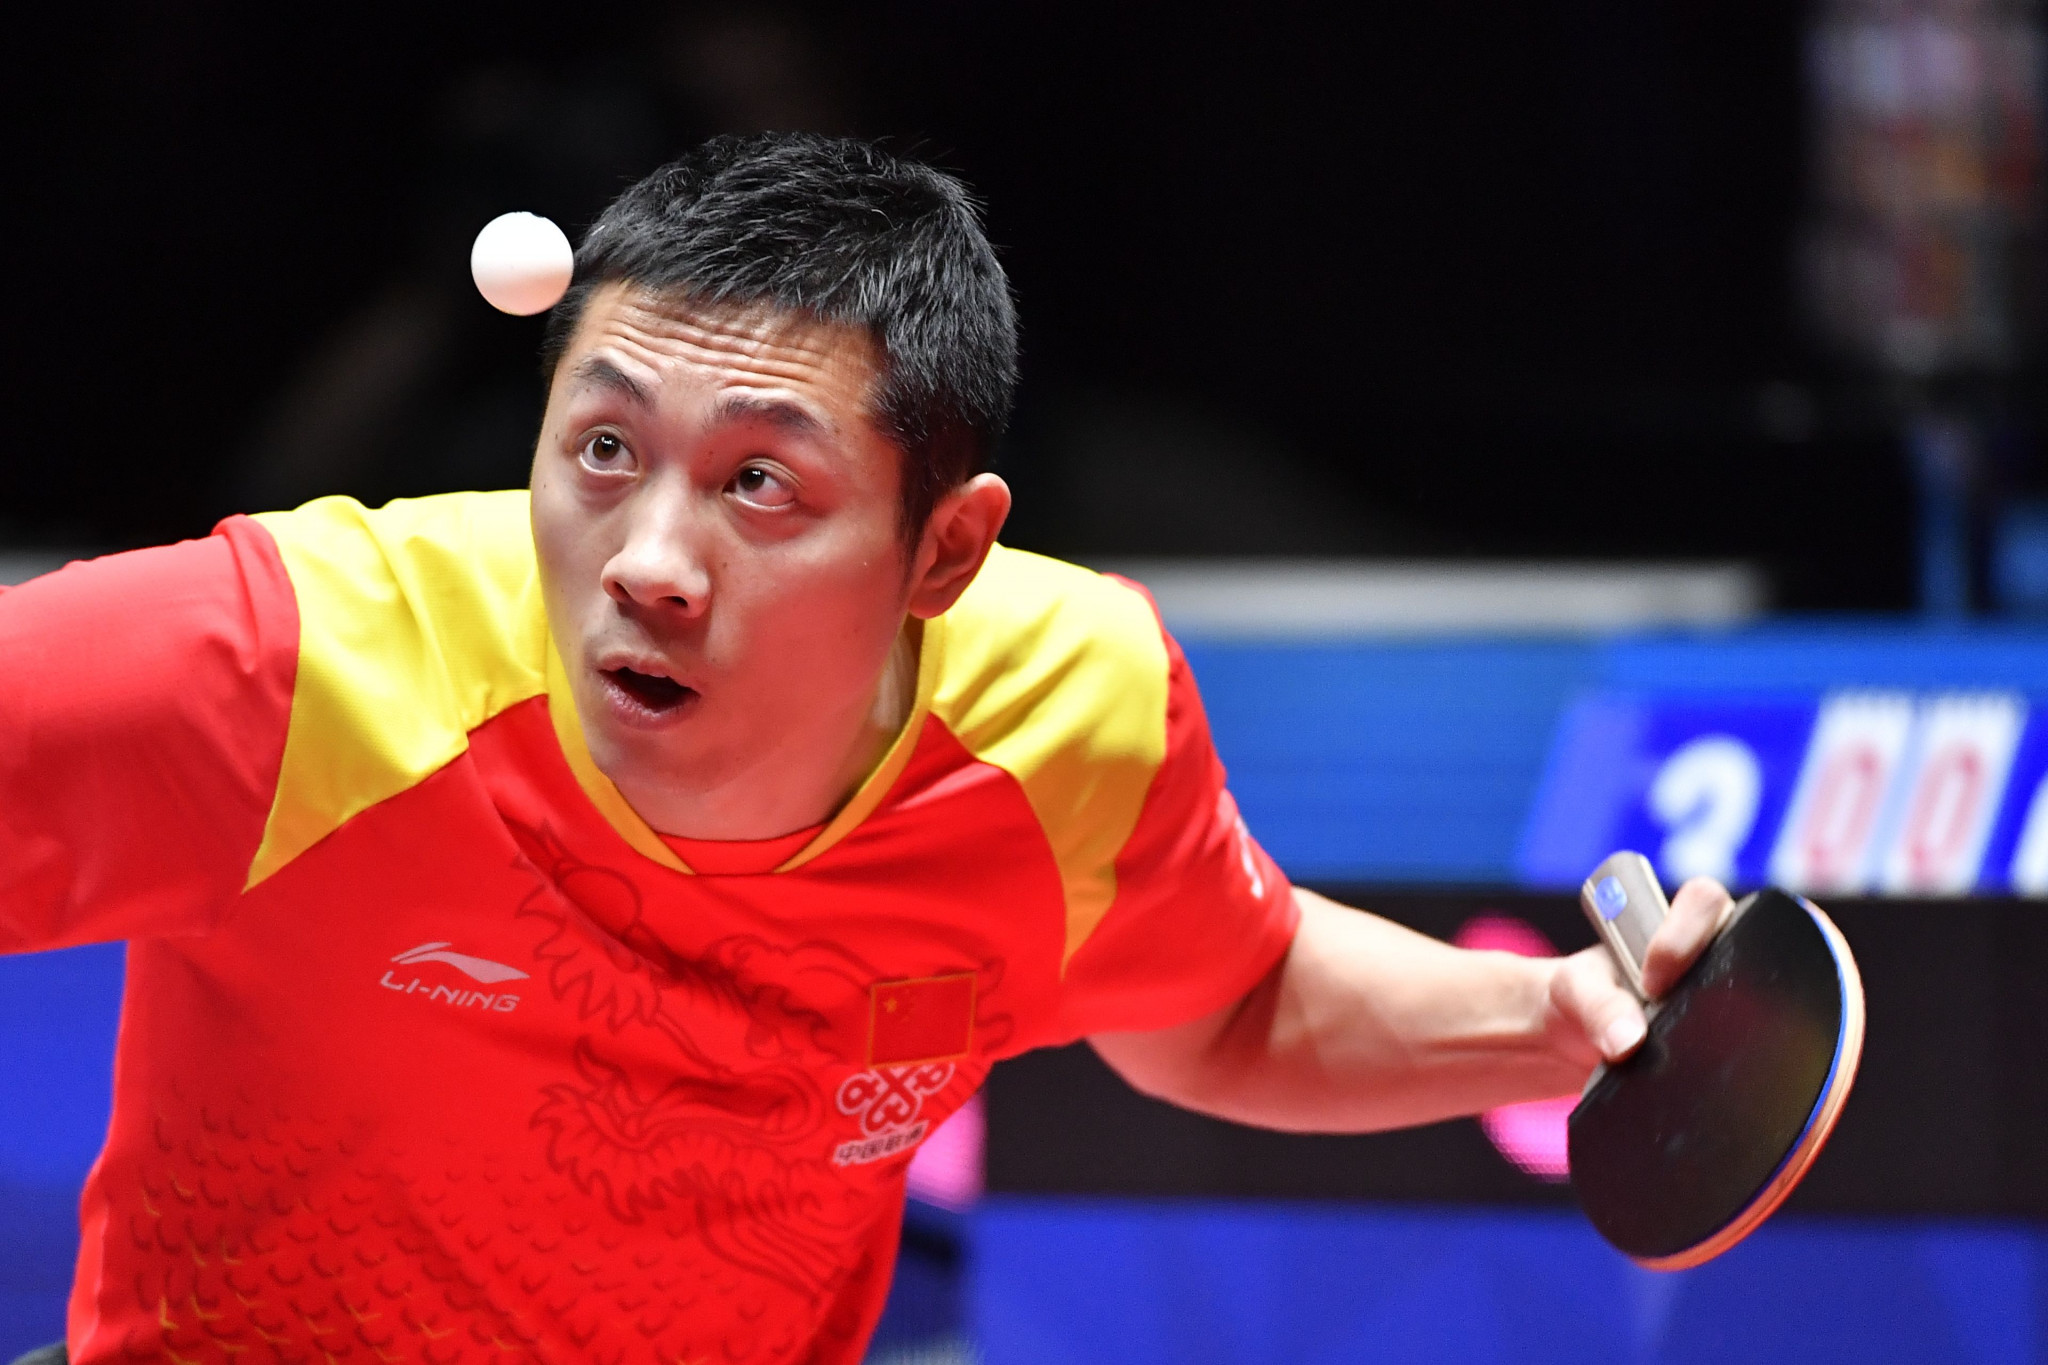 Tickets have gone on sale for this year's International Table Tennis Federation World Championships in Budapest ©Getty Images